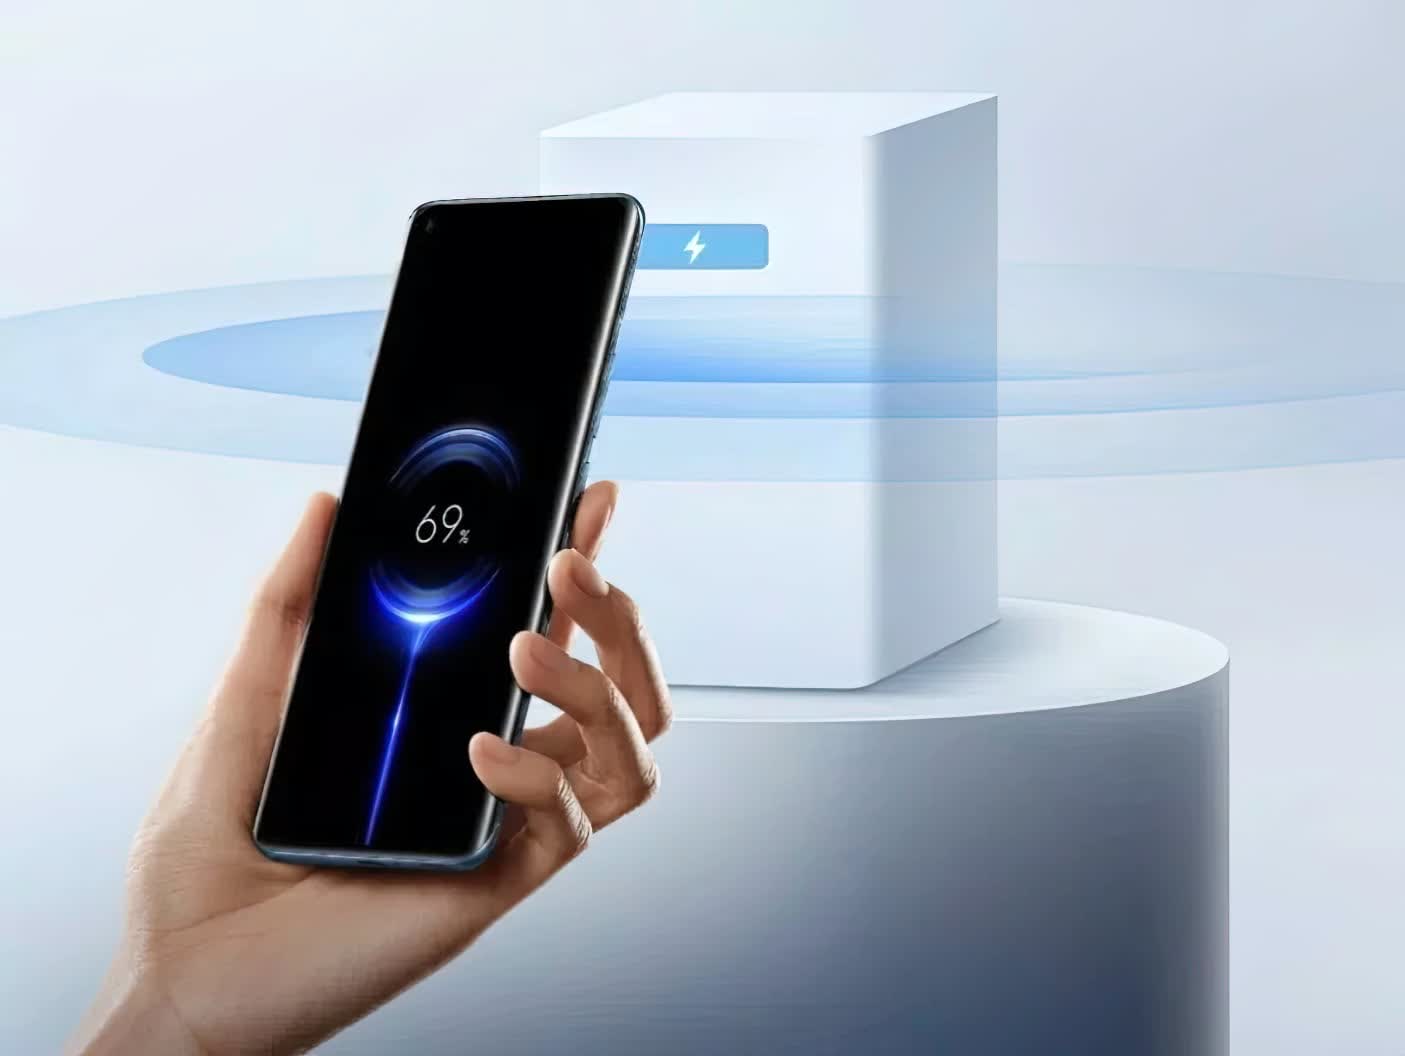 Xiaomi Air Charge claims it's capable of 5W wireless charging over several meters, but is it?